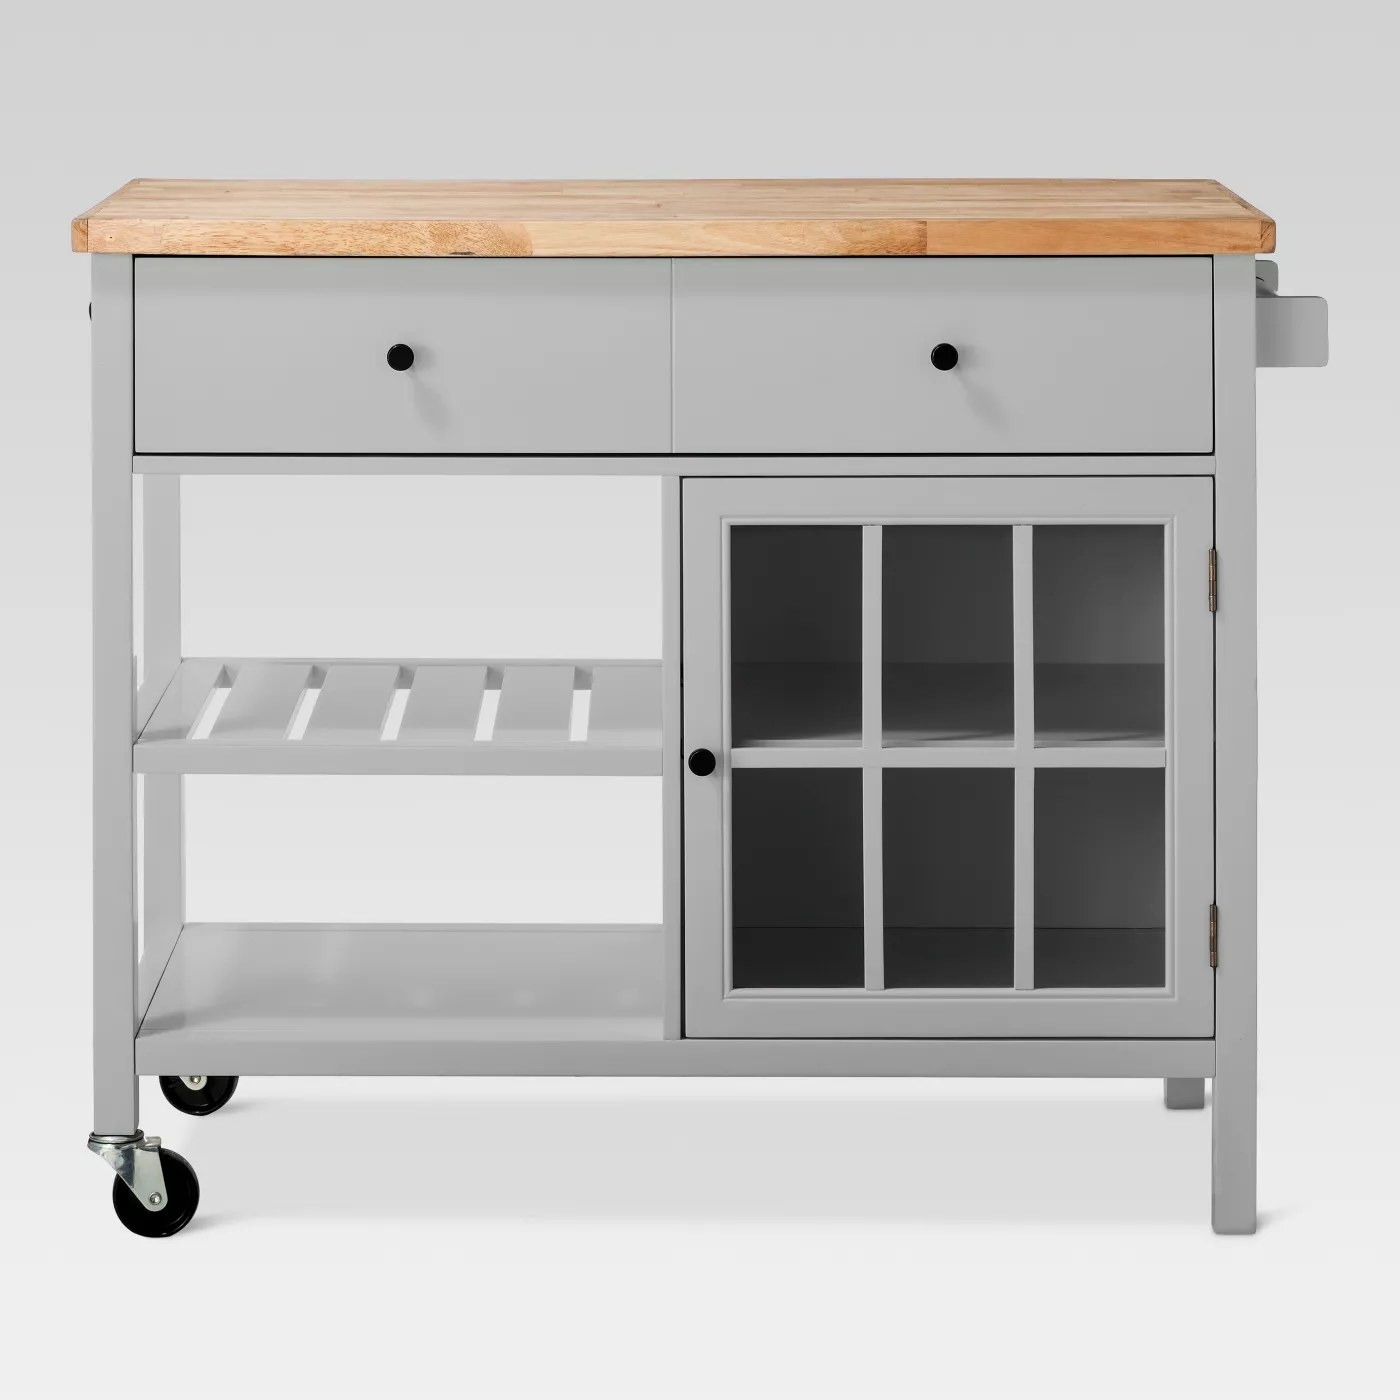 The kitchen island on wheels with and drawer and four separate shelves